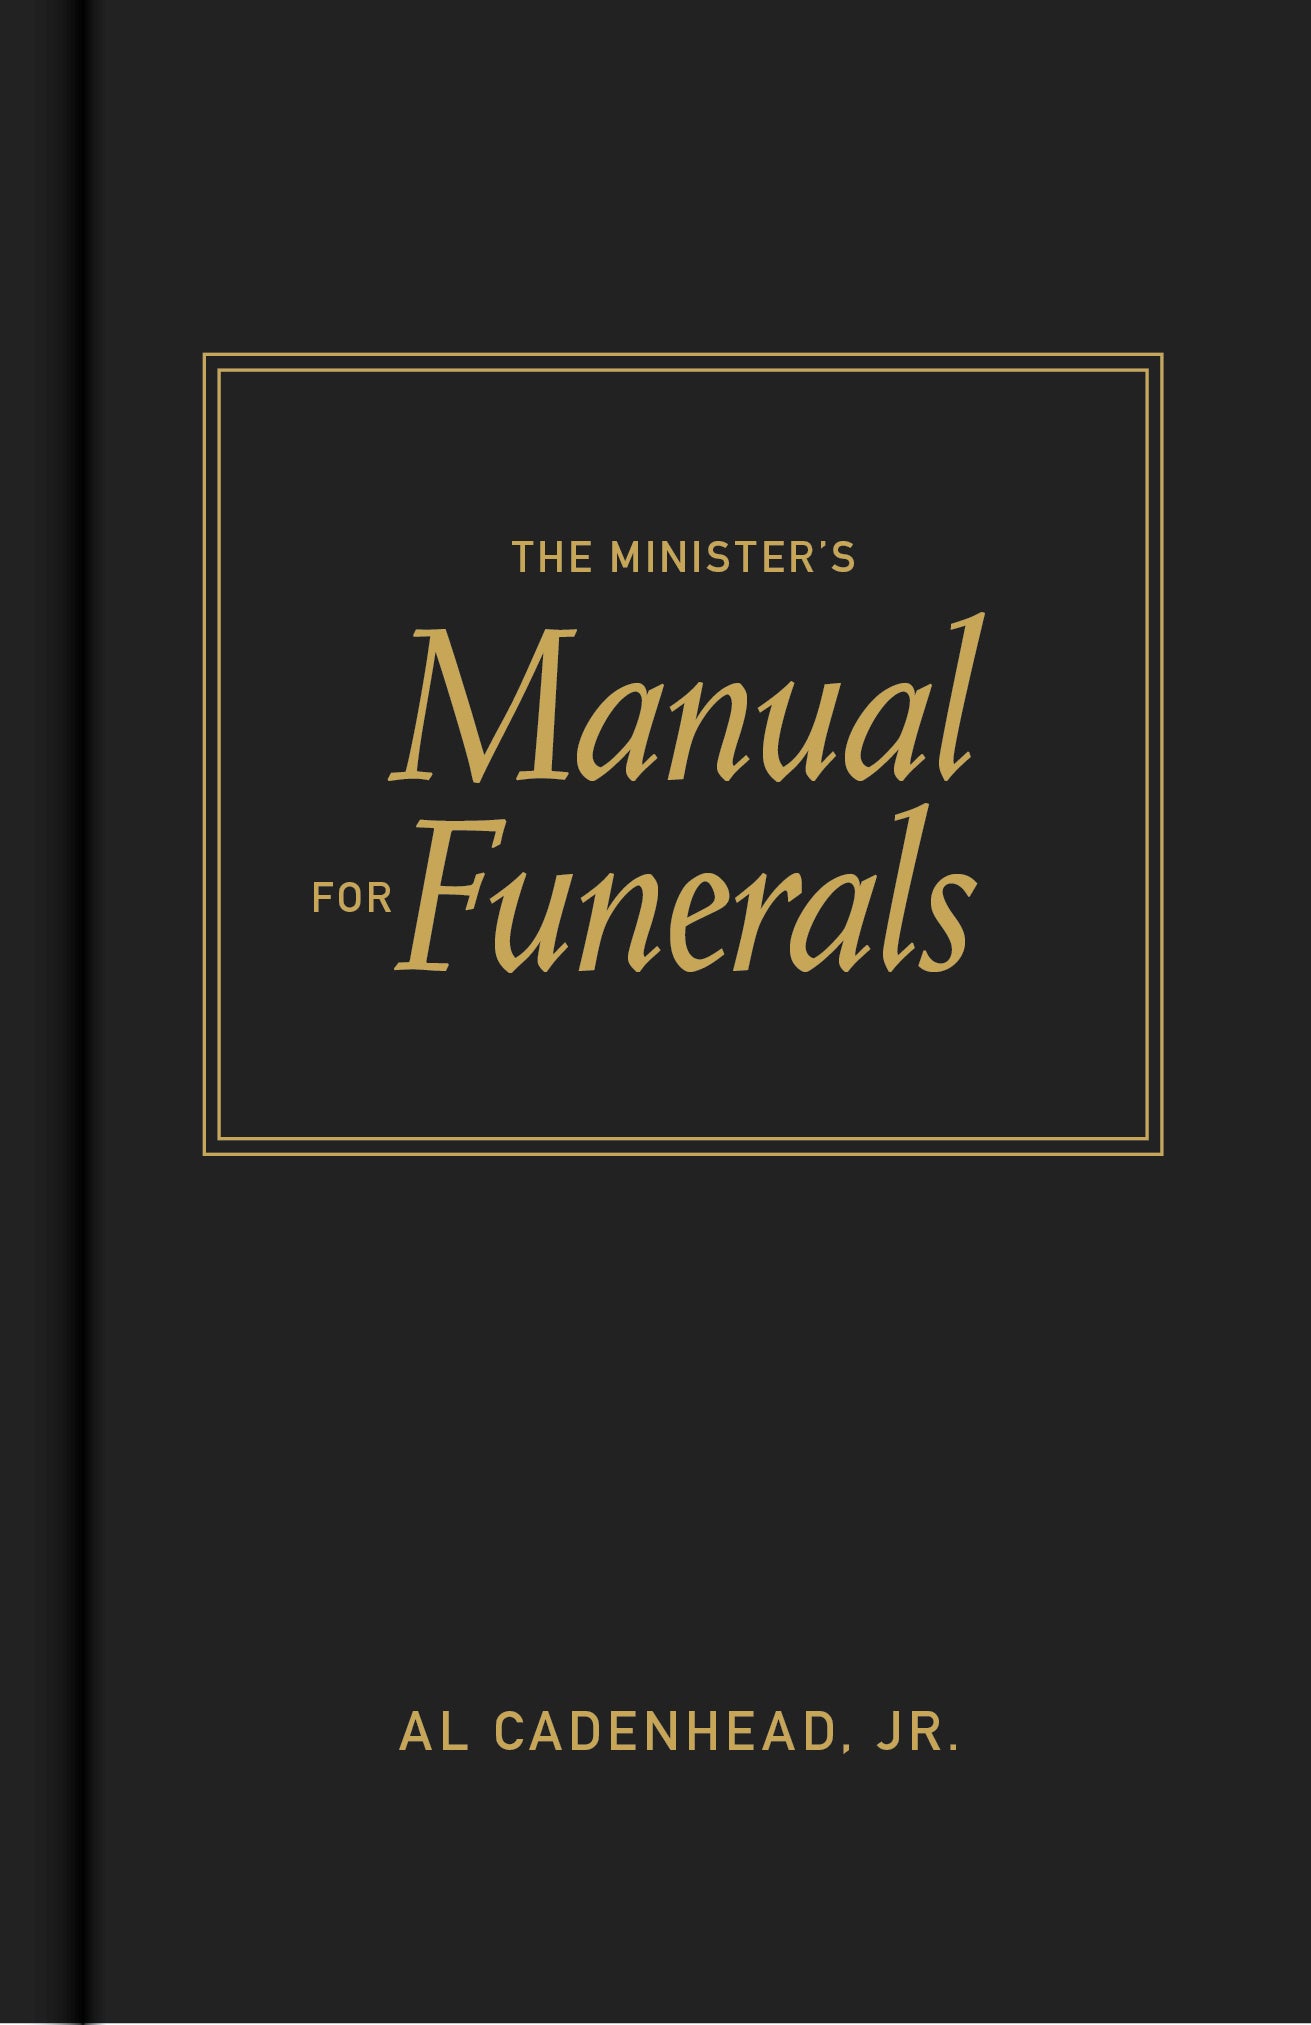 Image of The Ministers Manual For Funerals other